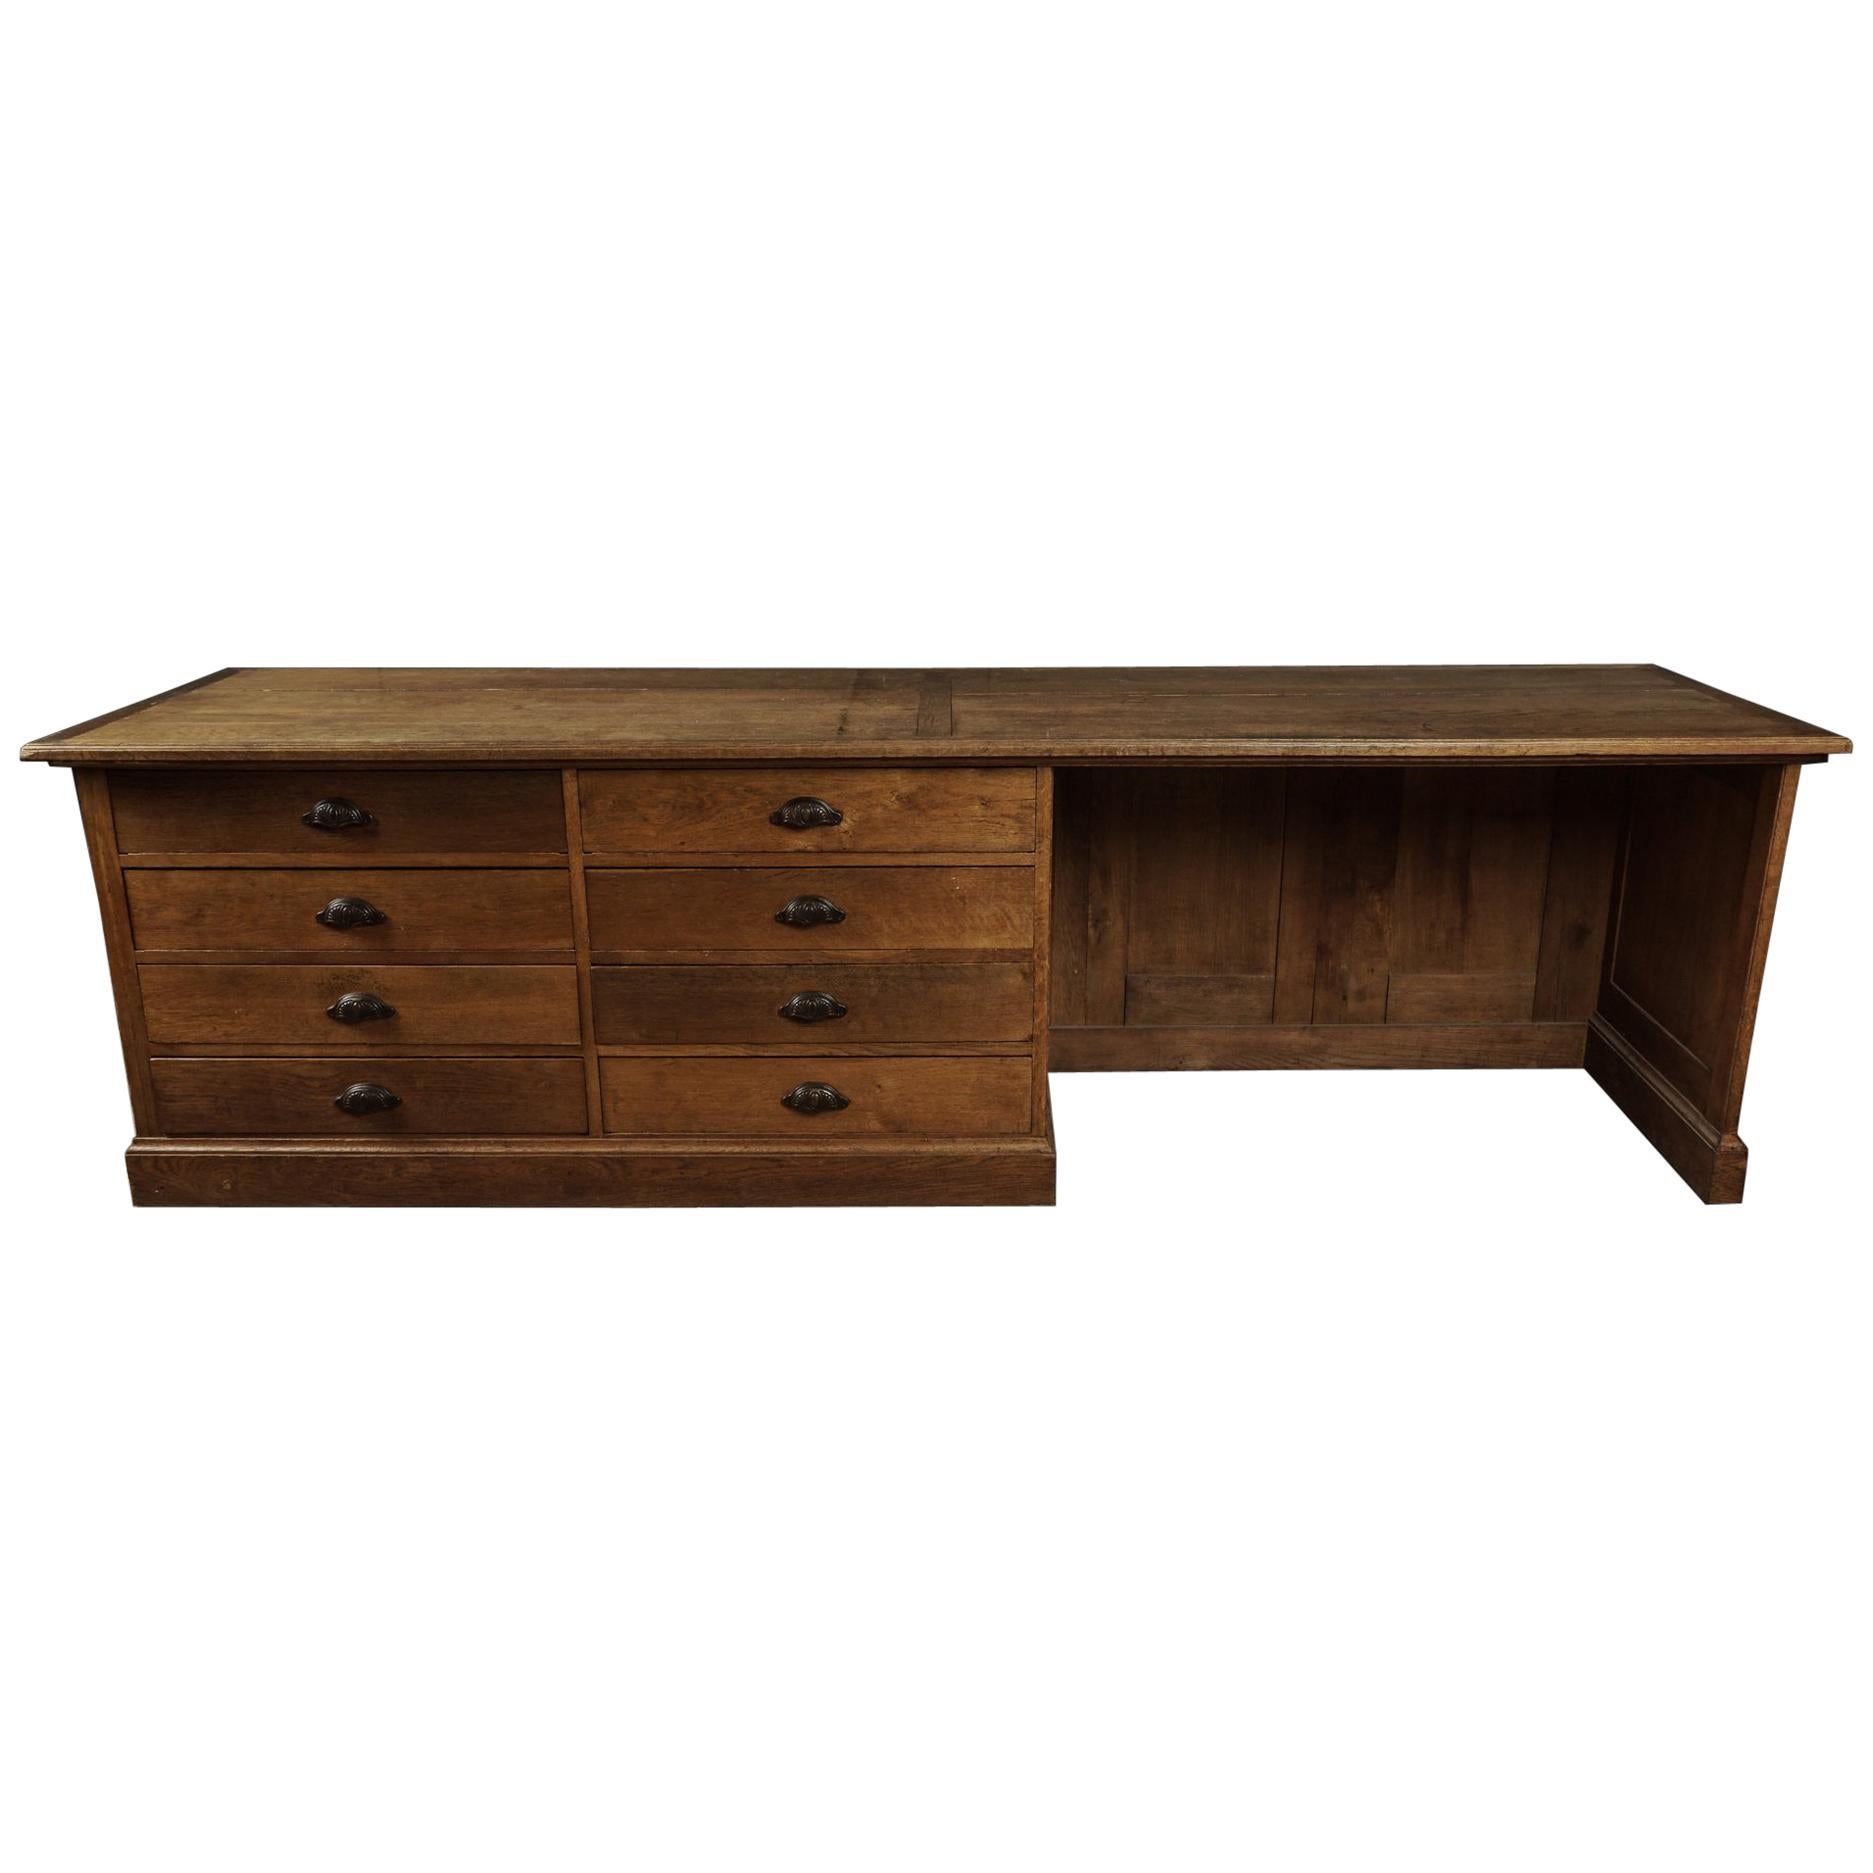 Large Oak Counter with Drawers from France, circa 1930